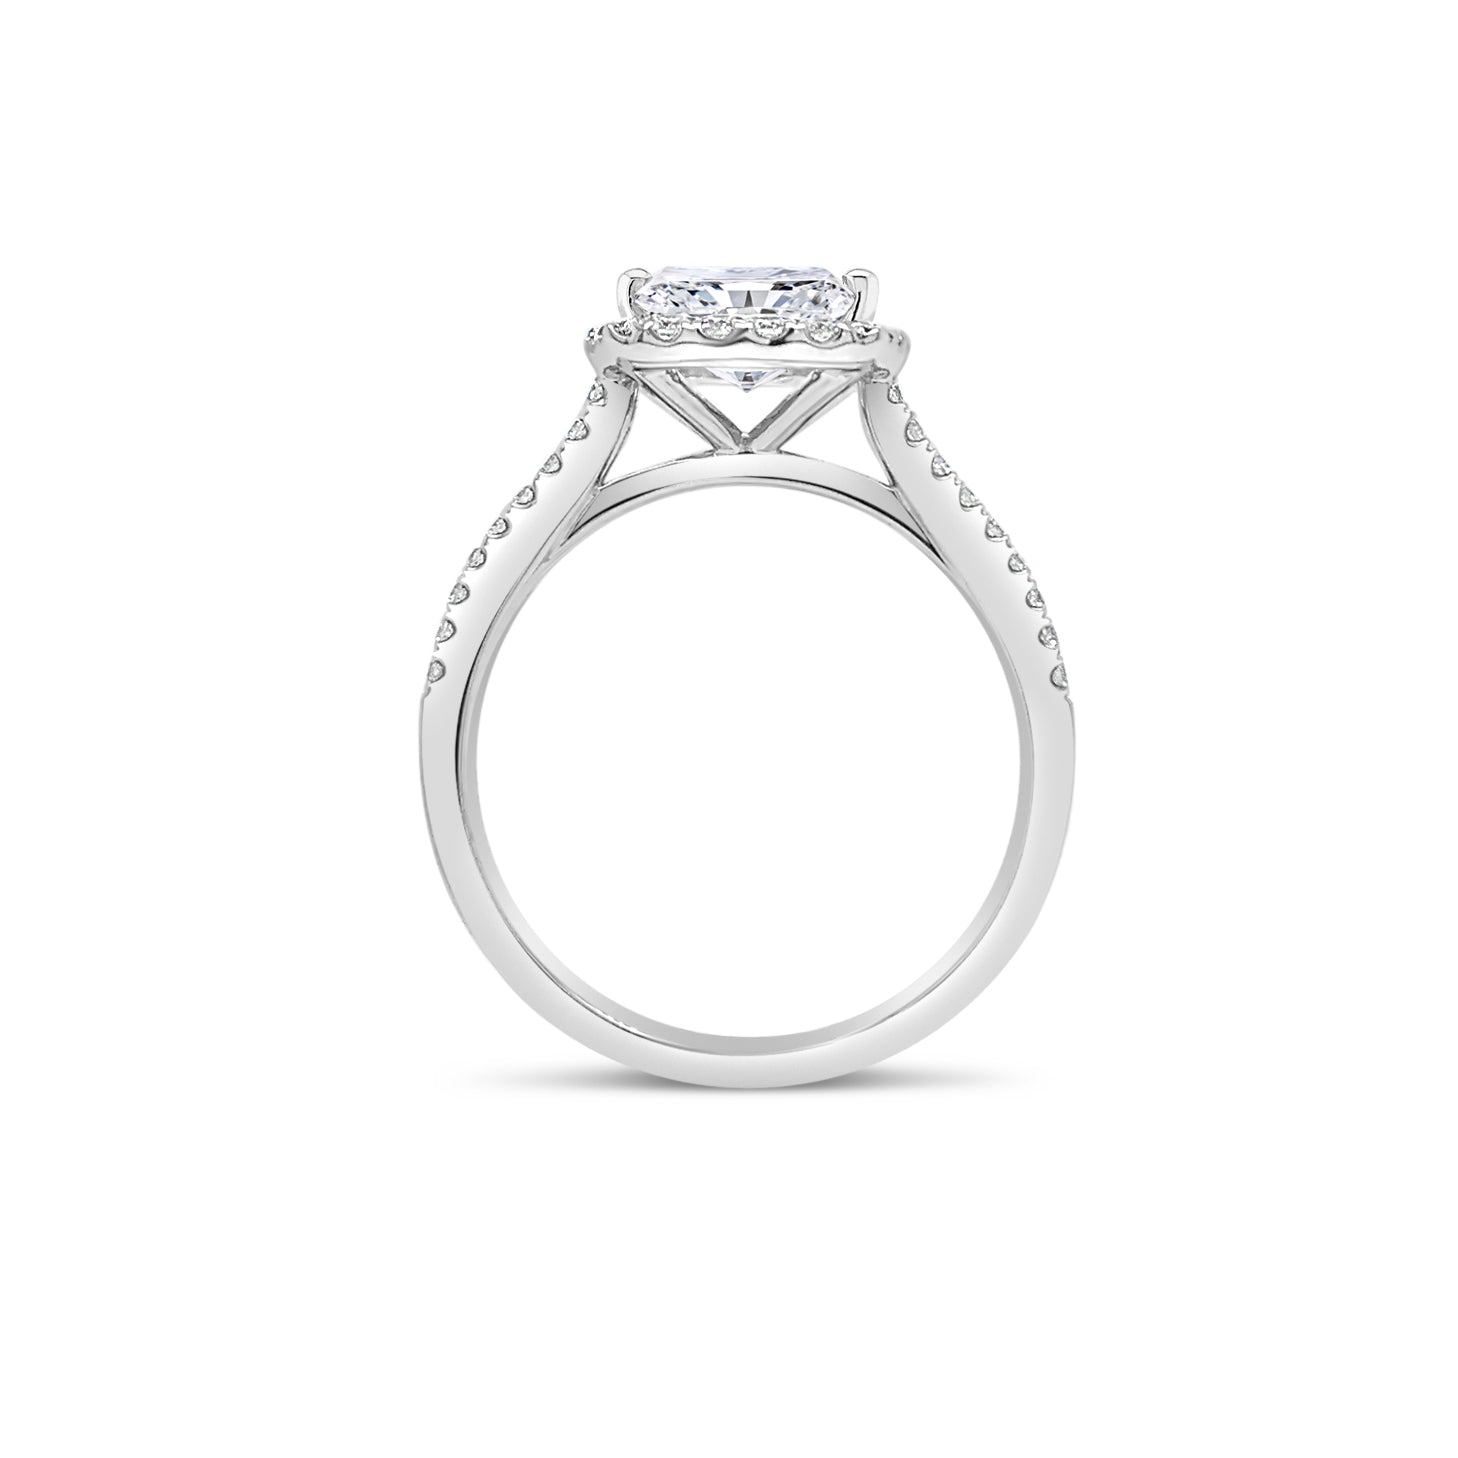 Cushion Halo Diamond Engagement Ring with Split Shank  -18K weighting 4.45 GR  - 56 round diamonds totaling 0.45 carats